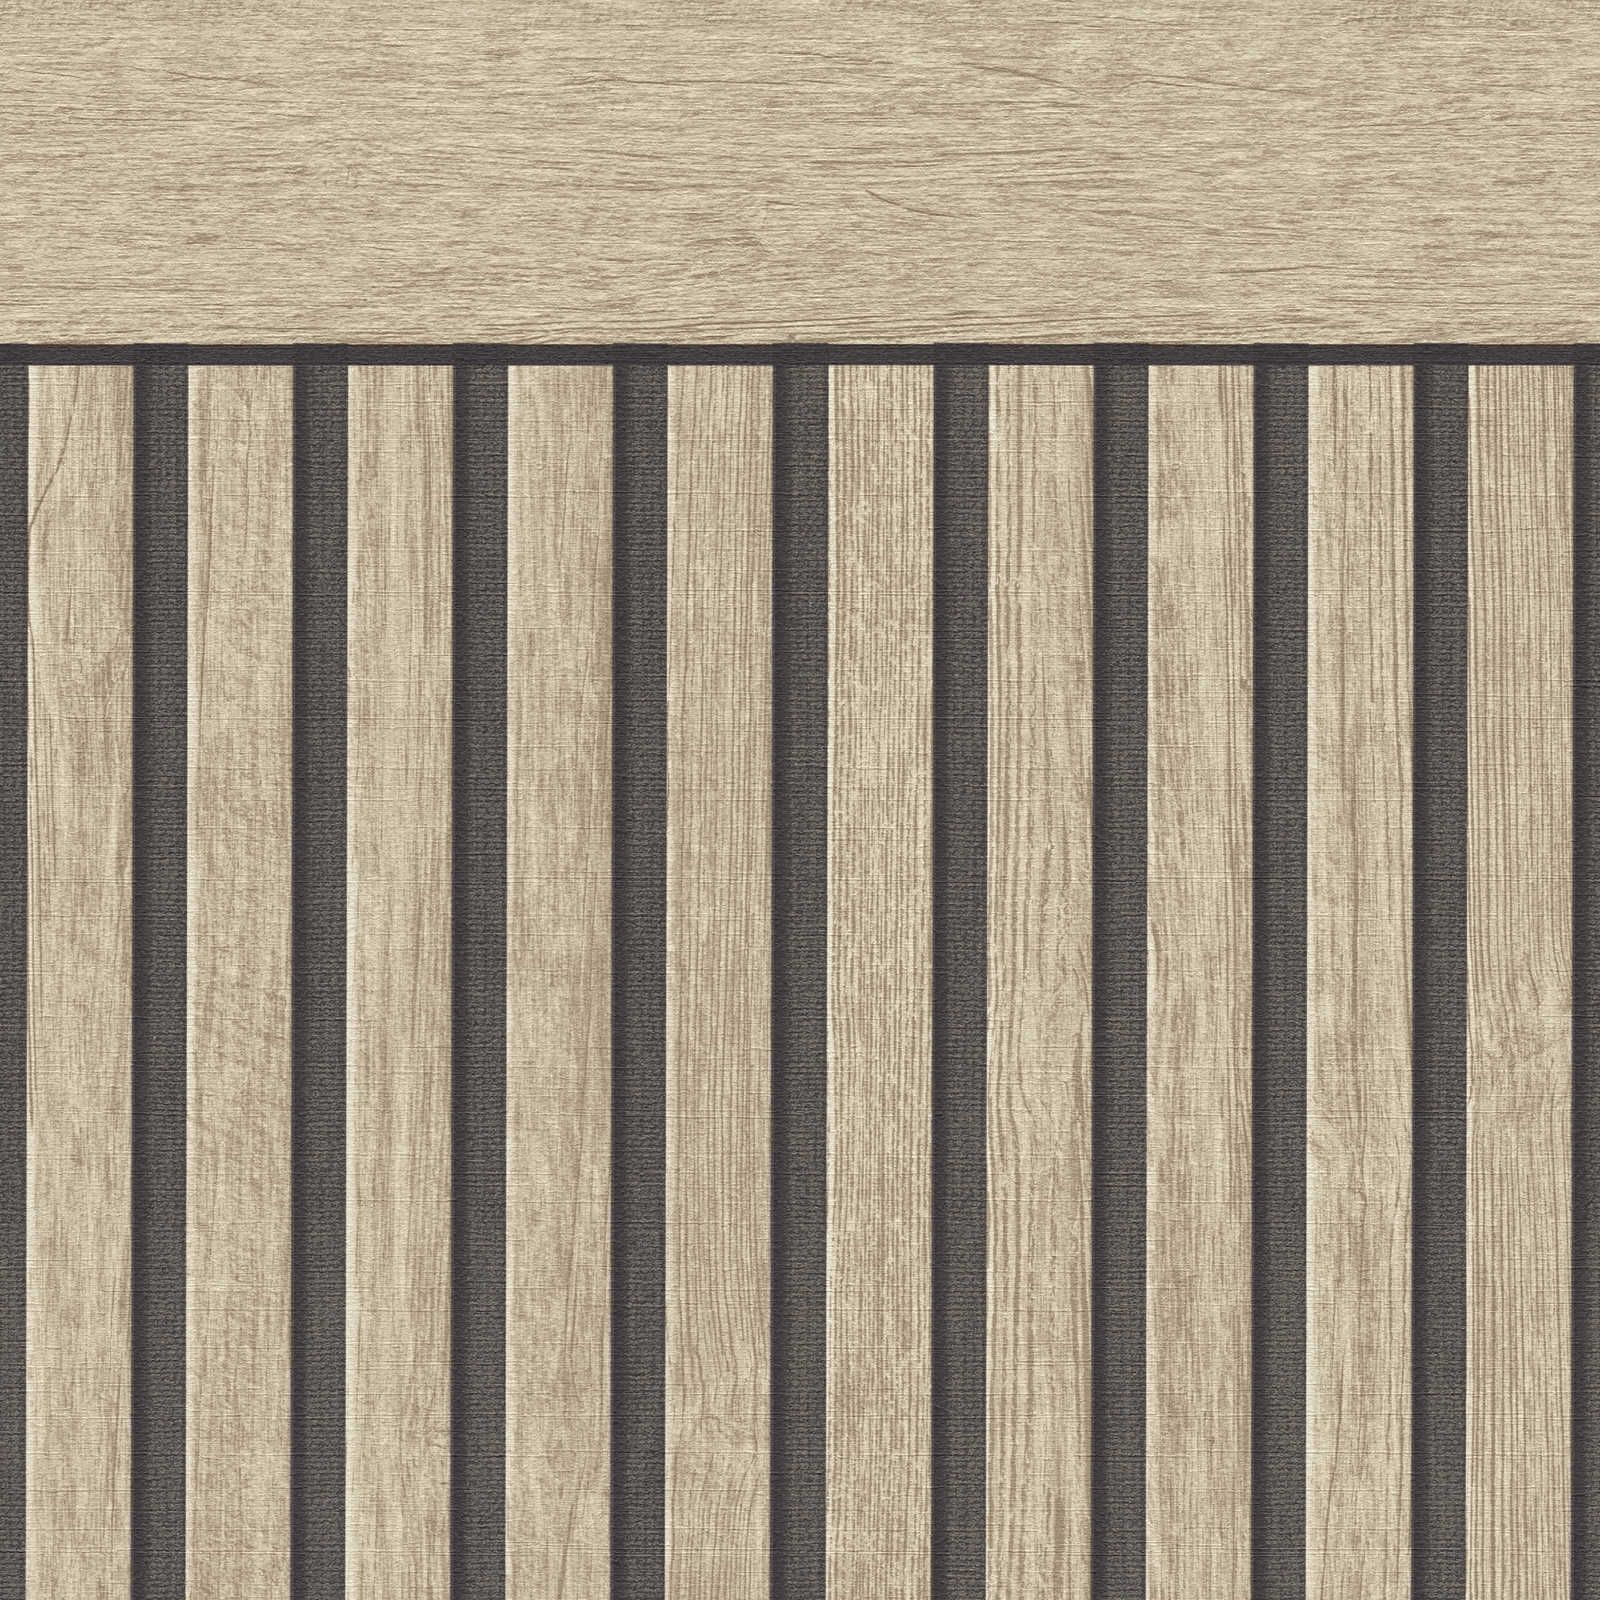         Non-woven wall panel with realistic acoustic panel pattern made of wood - beige, cream
    